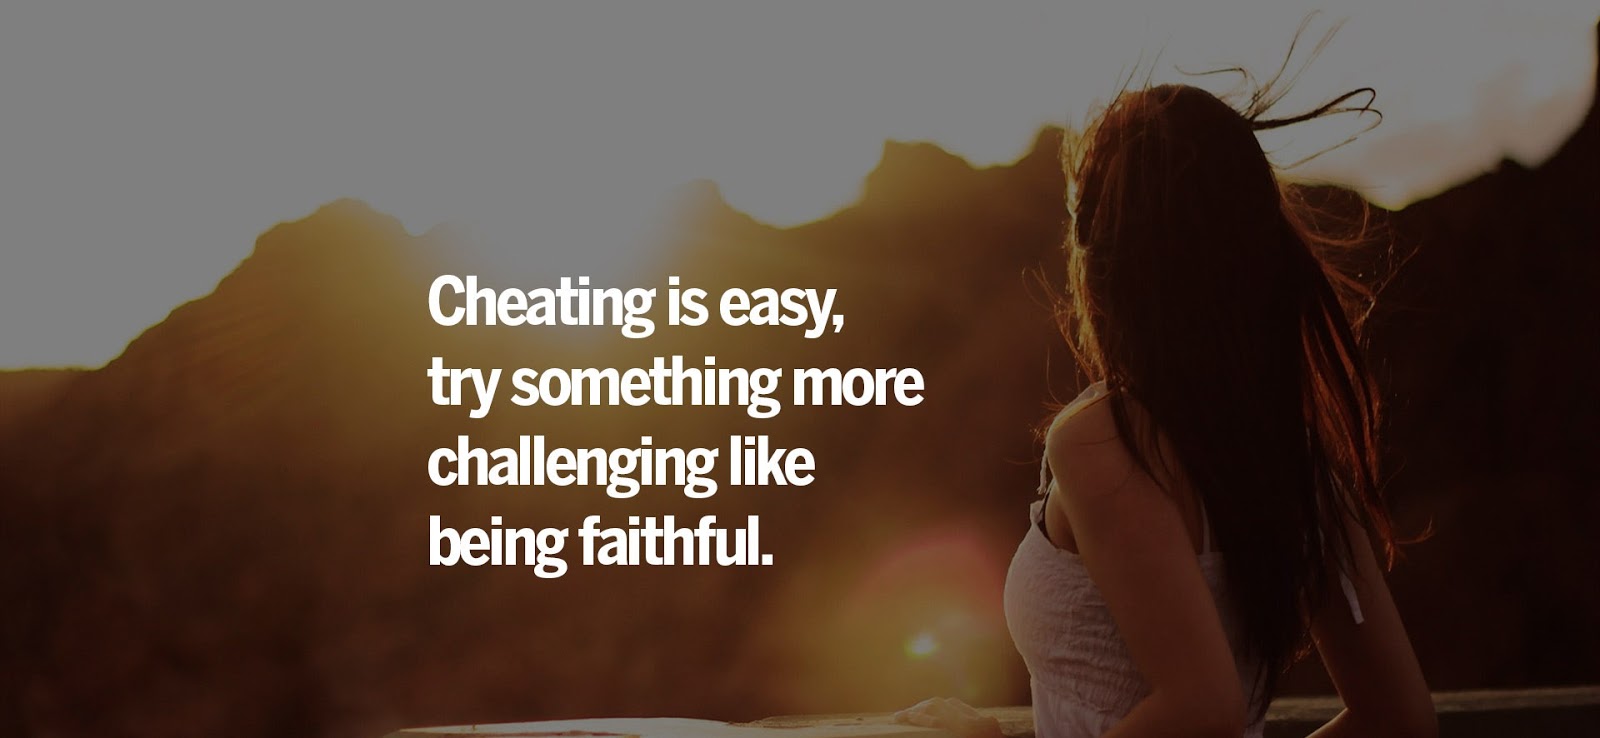 cheating images